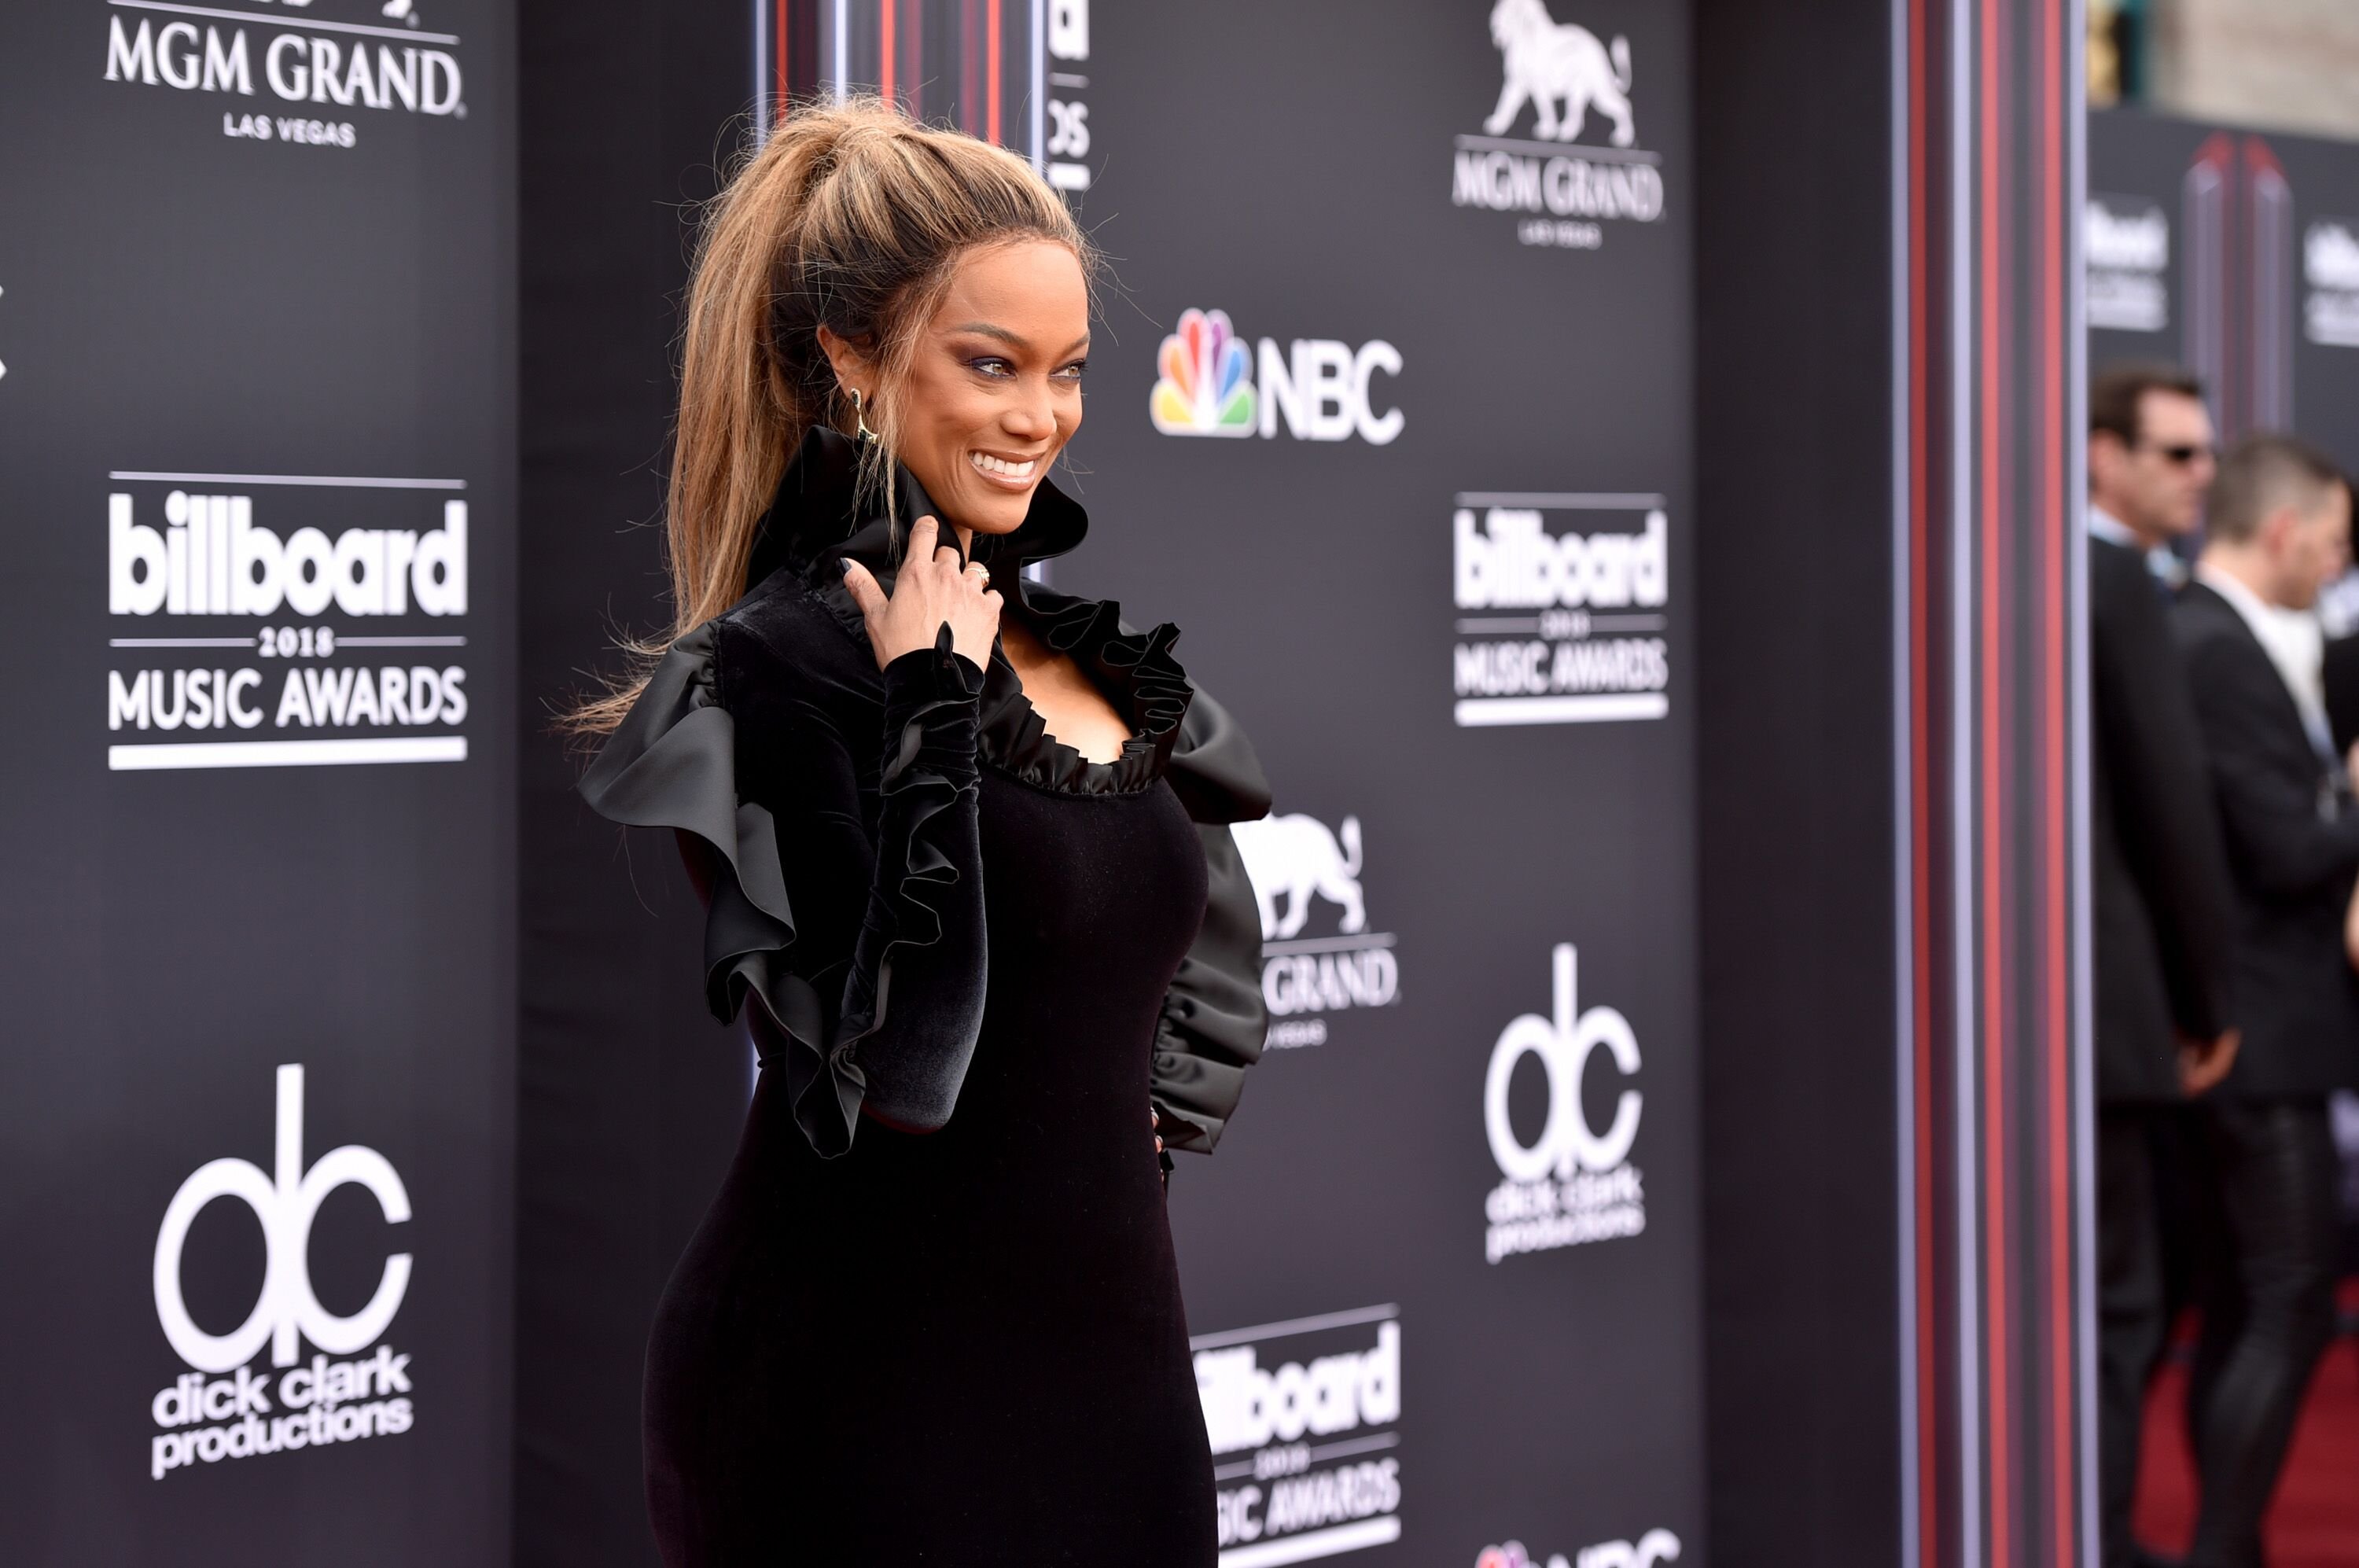 TV personality Tyra Banks attends the 2018 Billboard Music Awards at MGM Grand Garden Arena on May 20, 2018 | Photo: Getty Images